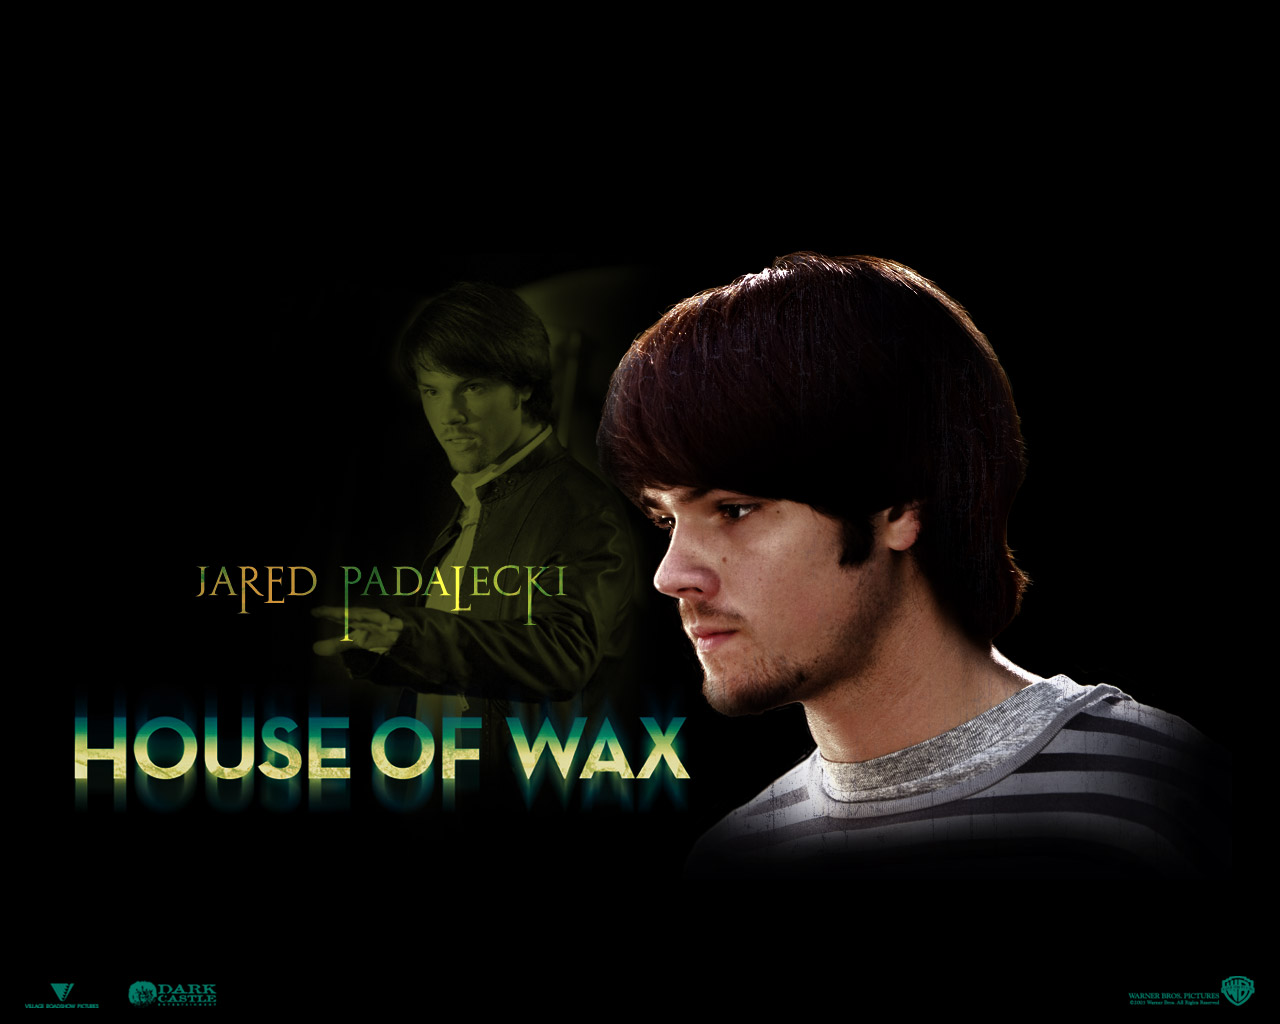 Download High quality House Of Wax wallpaper / Movies / 1280x1024